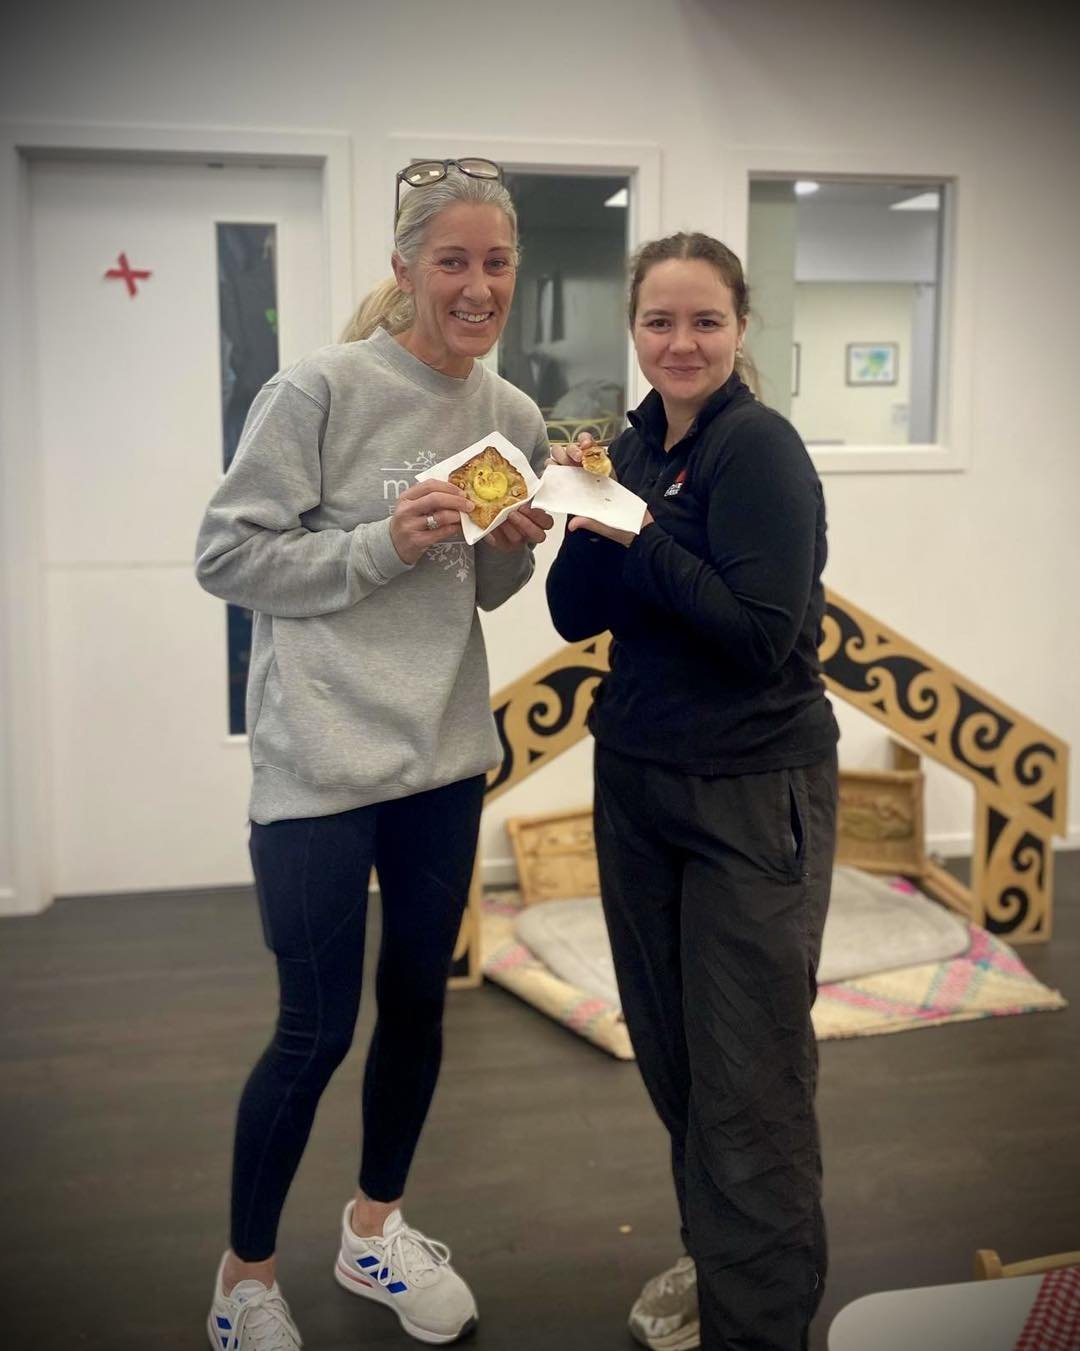 🌸 Yesterday at drop-off, our wonderful mums took a quick moment to celebrate Mother's Day together with a quick bite and a coffee. What a great start to the day, sharing smiles, stories, and a little bit of joy. Here's to all the amazing mums who ma